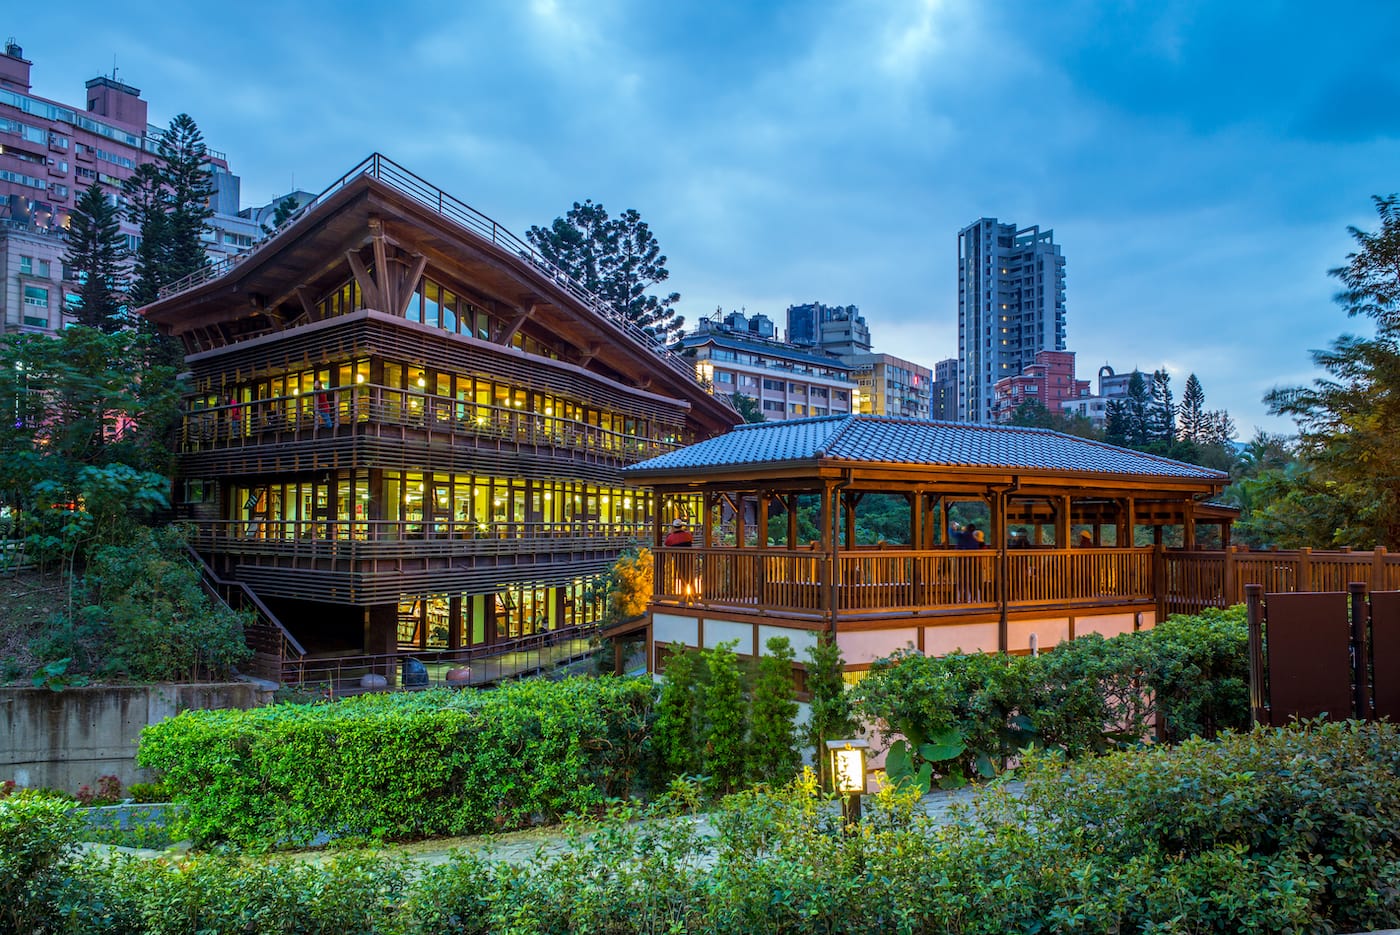 Two wooden buildings with lots of windows and wrap around terraces on each level. The buildings are set amongst greenery, while the background shows skyscrapers.